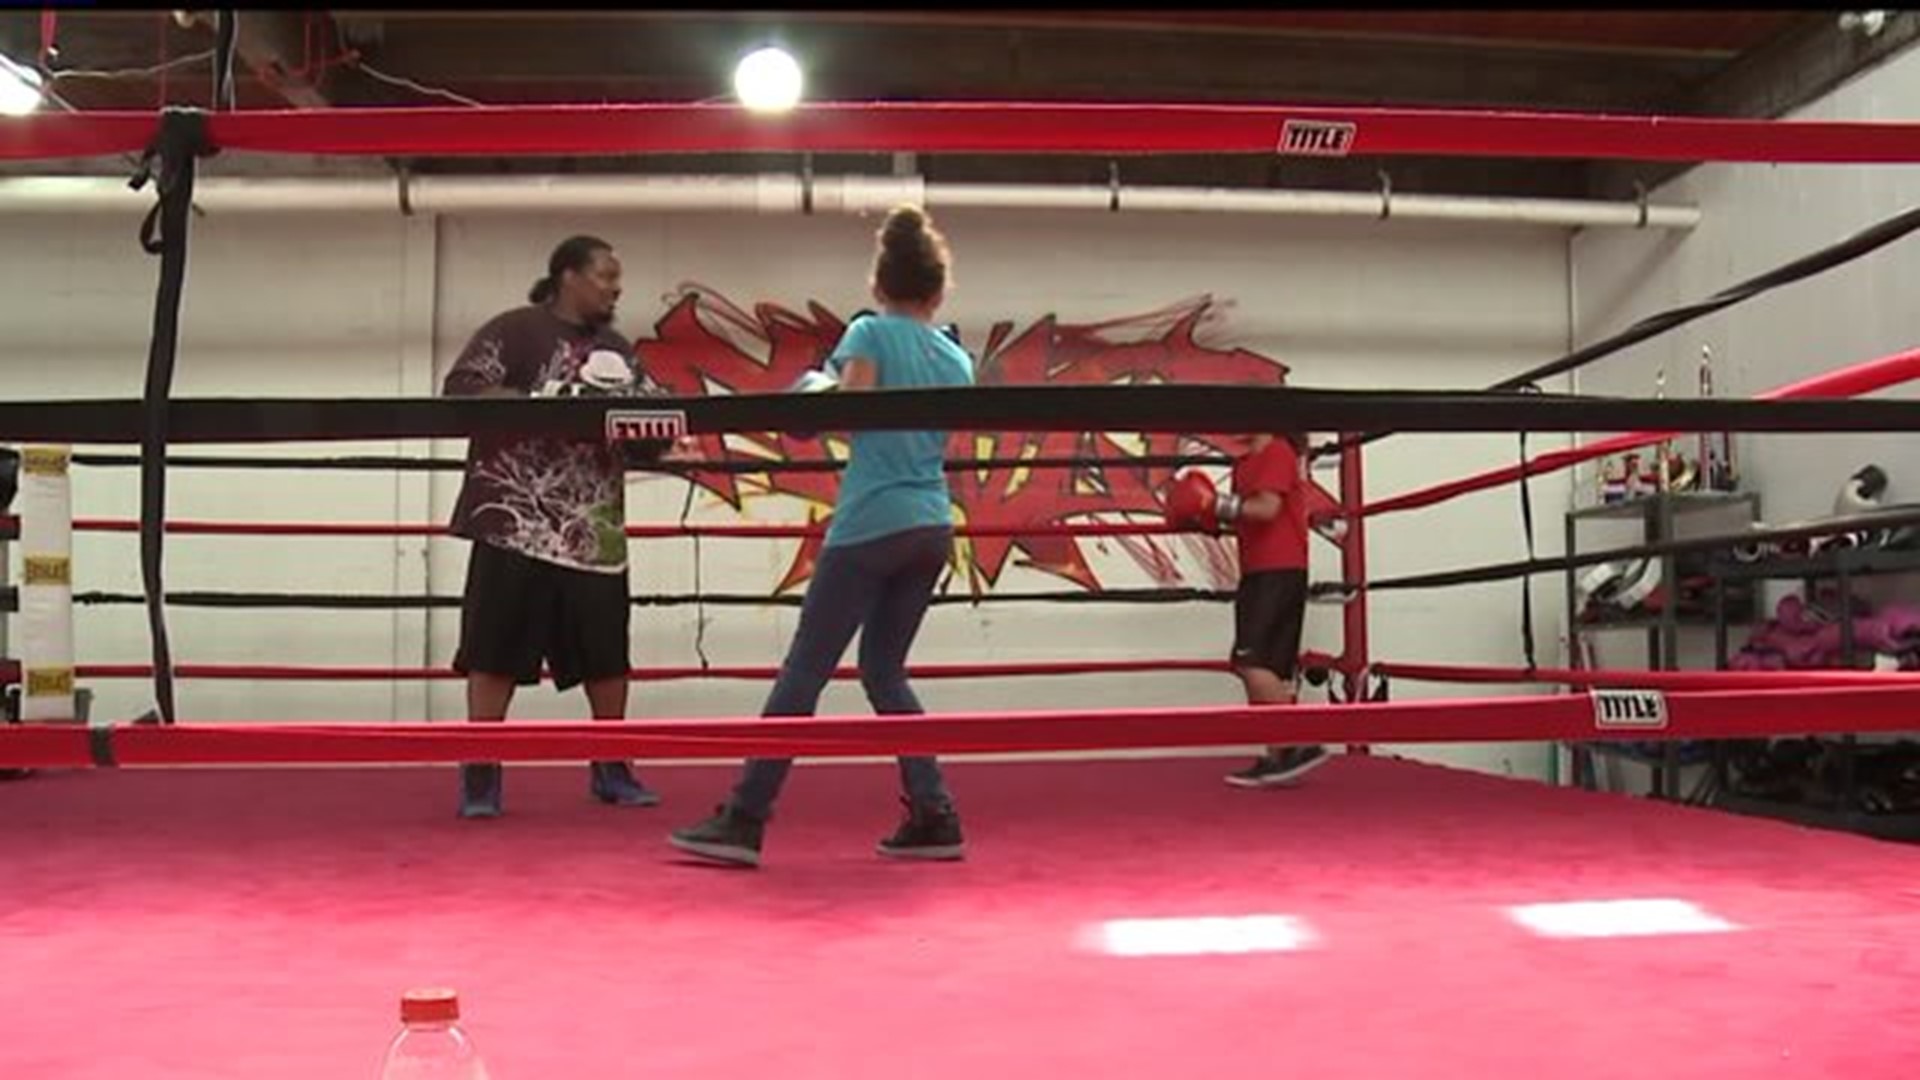 York boxing program provides extra dad for local youth